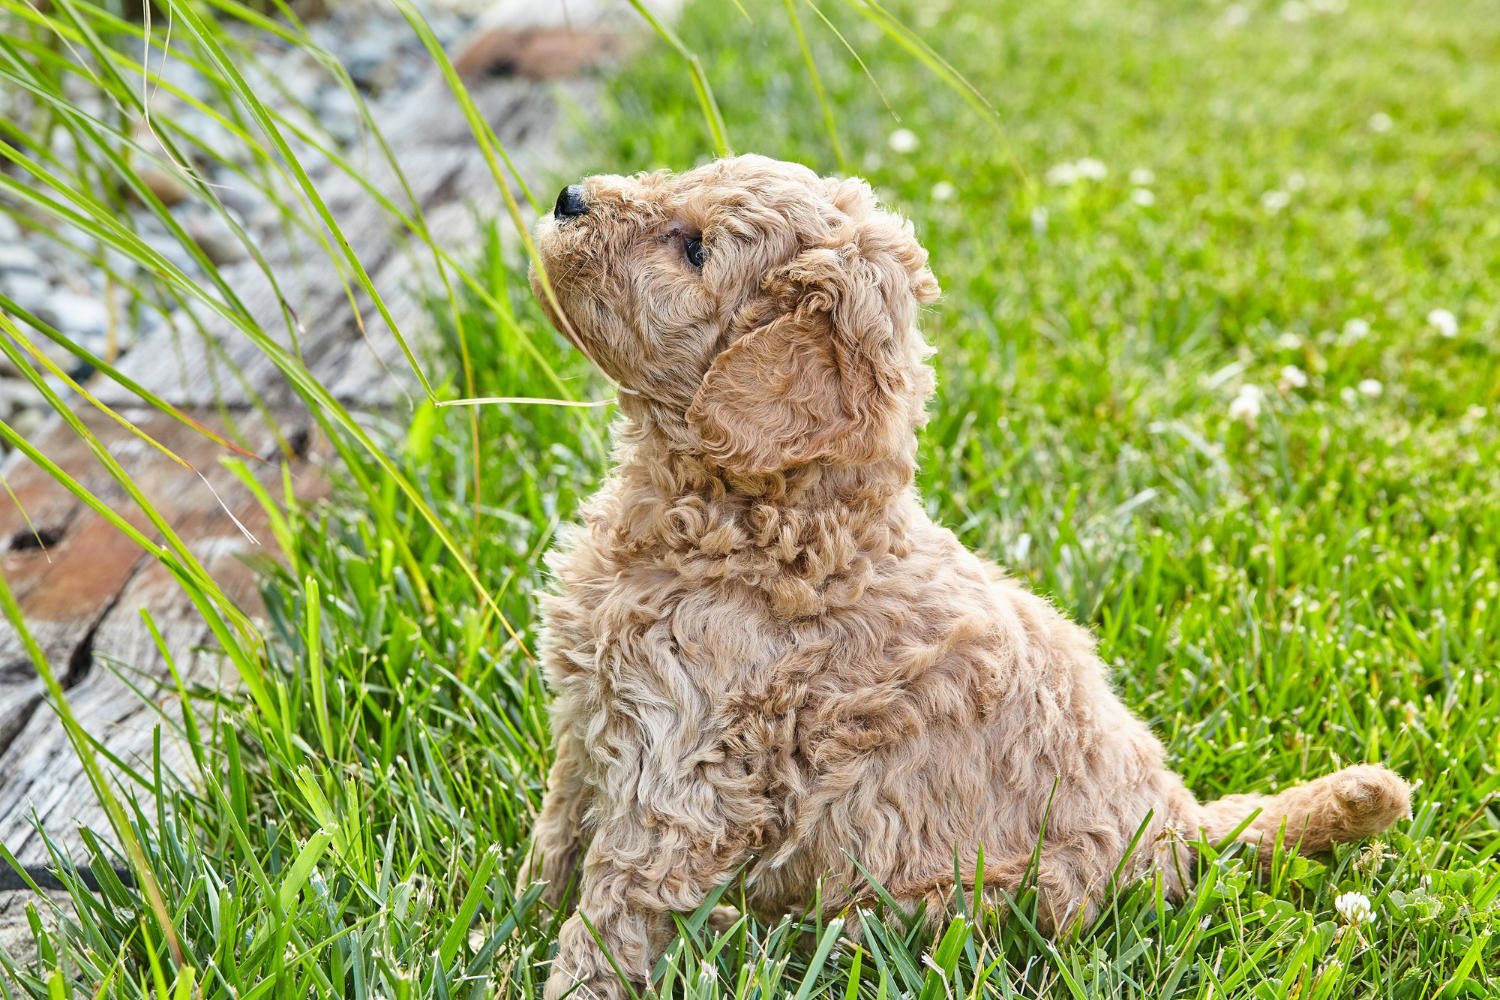 "When Will Your Mini Goldendoodle Reach Full Size? A Guide to Their Growth and Development"